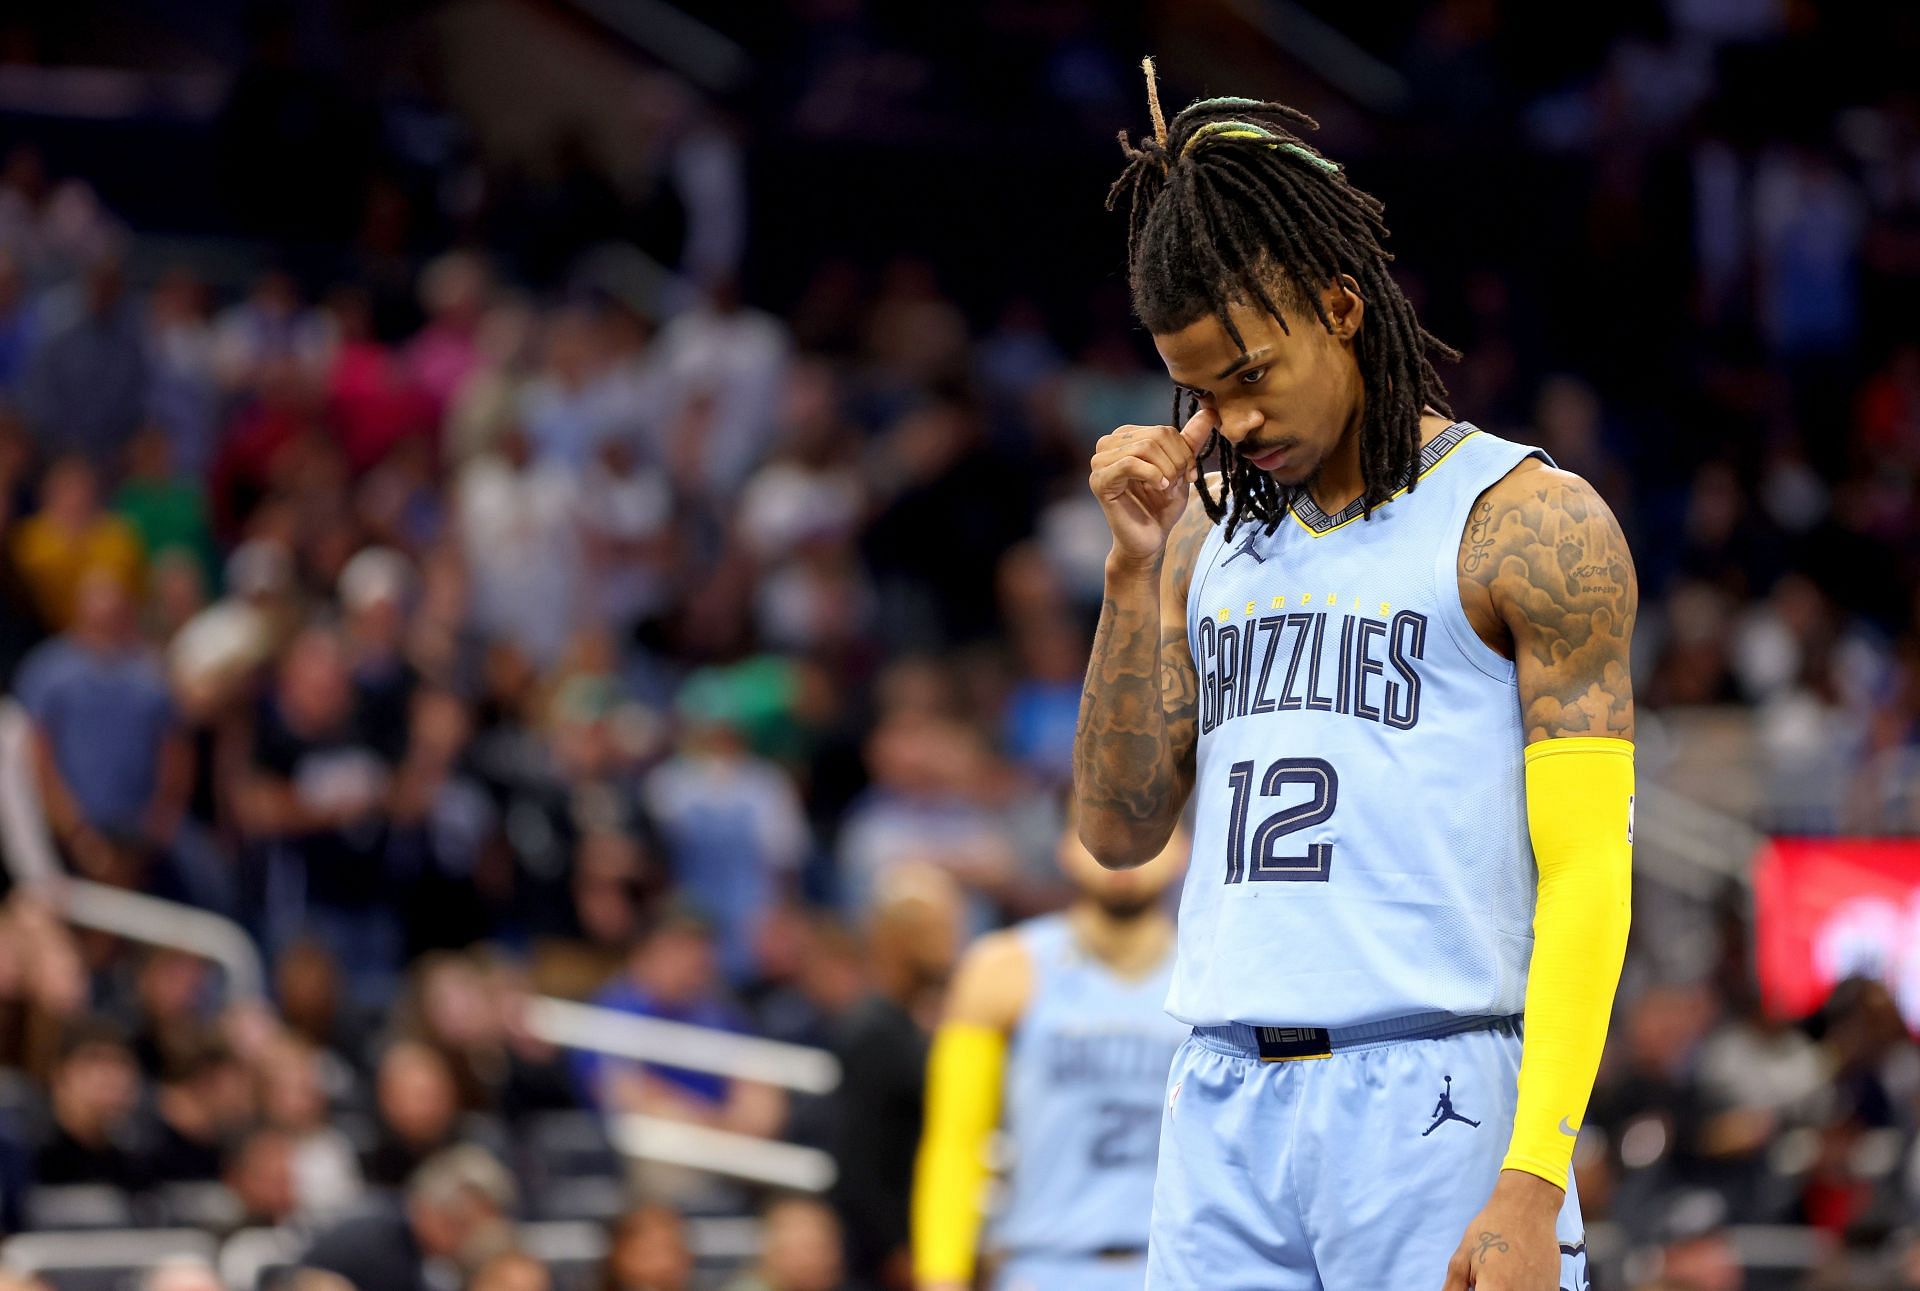 Nike releases statement of support for Ja Morant after latest NBA suspension